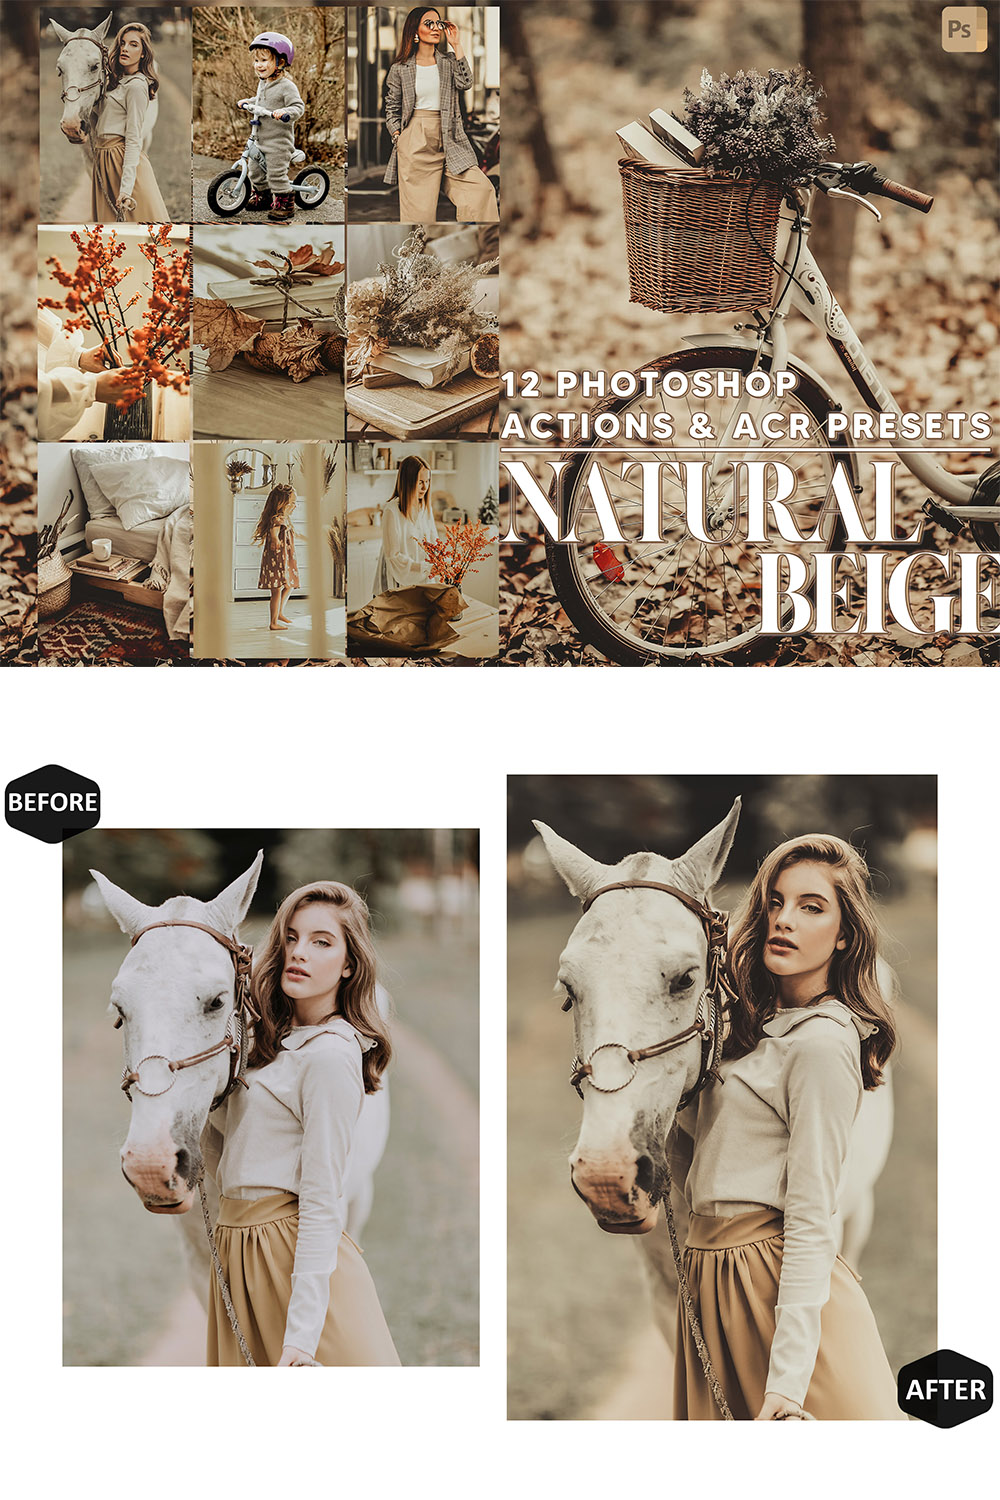 12 Photoshop Actions, Natural Beige Ps Action, Moody ACR Preset, Cream Ps Filter, Atn Portrait And Lifestyle Theme For Instagram, Blogger pinterest preview image.